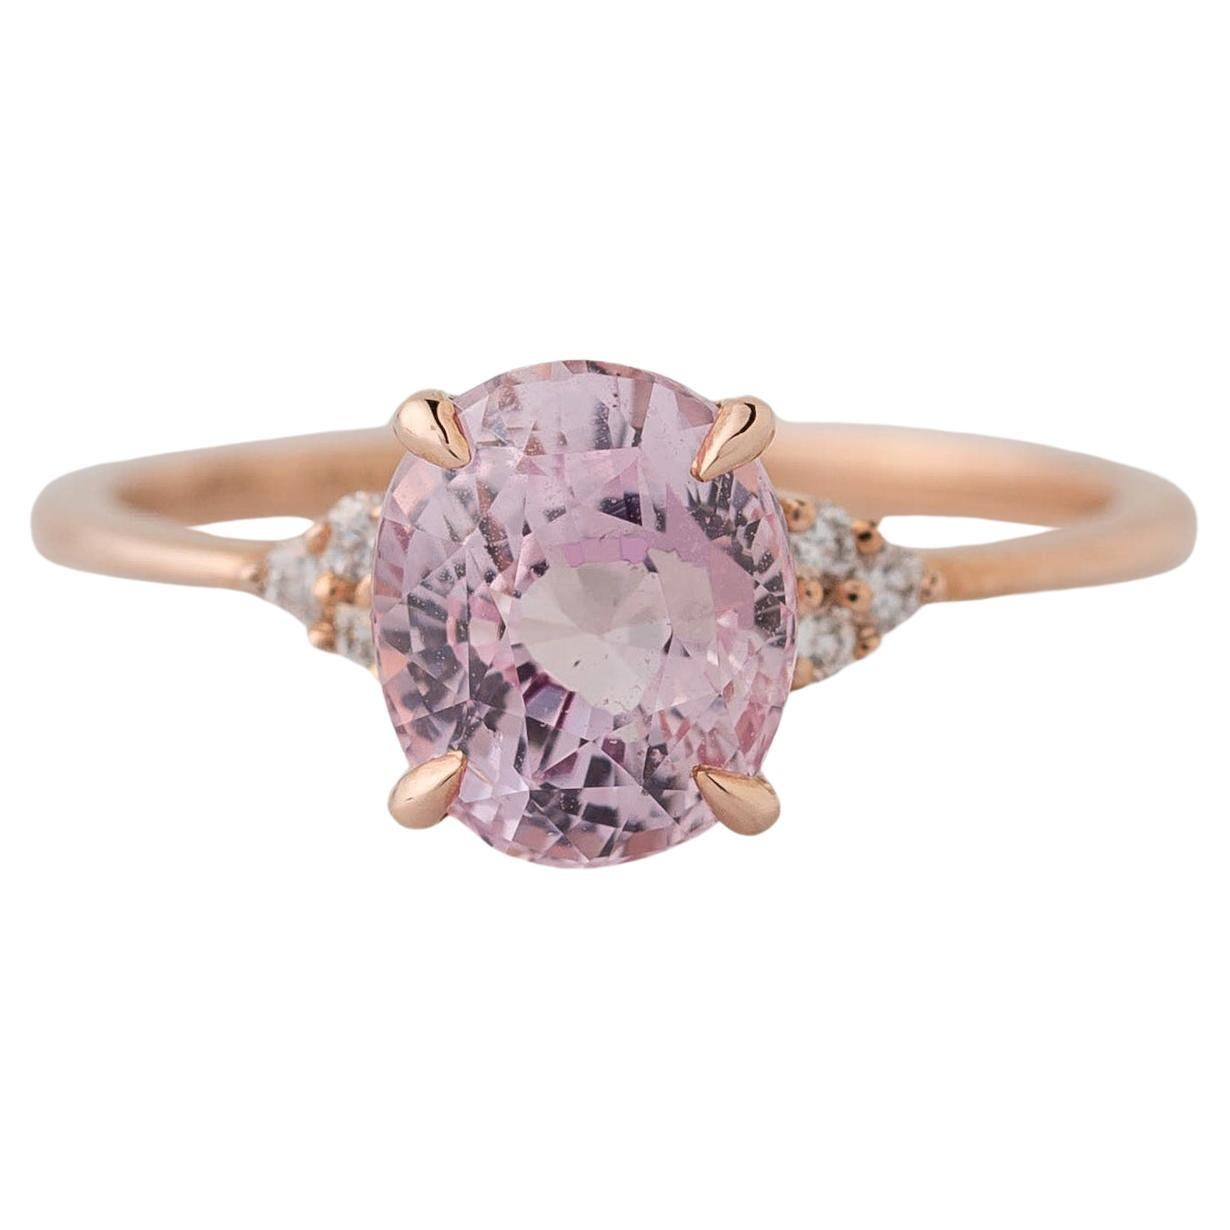 GIA Certified 2.31 Carat Oval Natural Pink Sapphire Diamond Ring